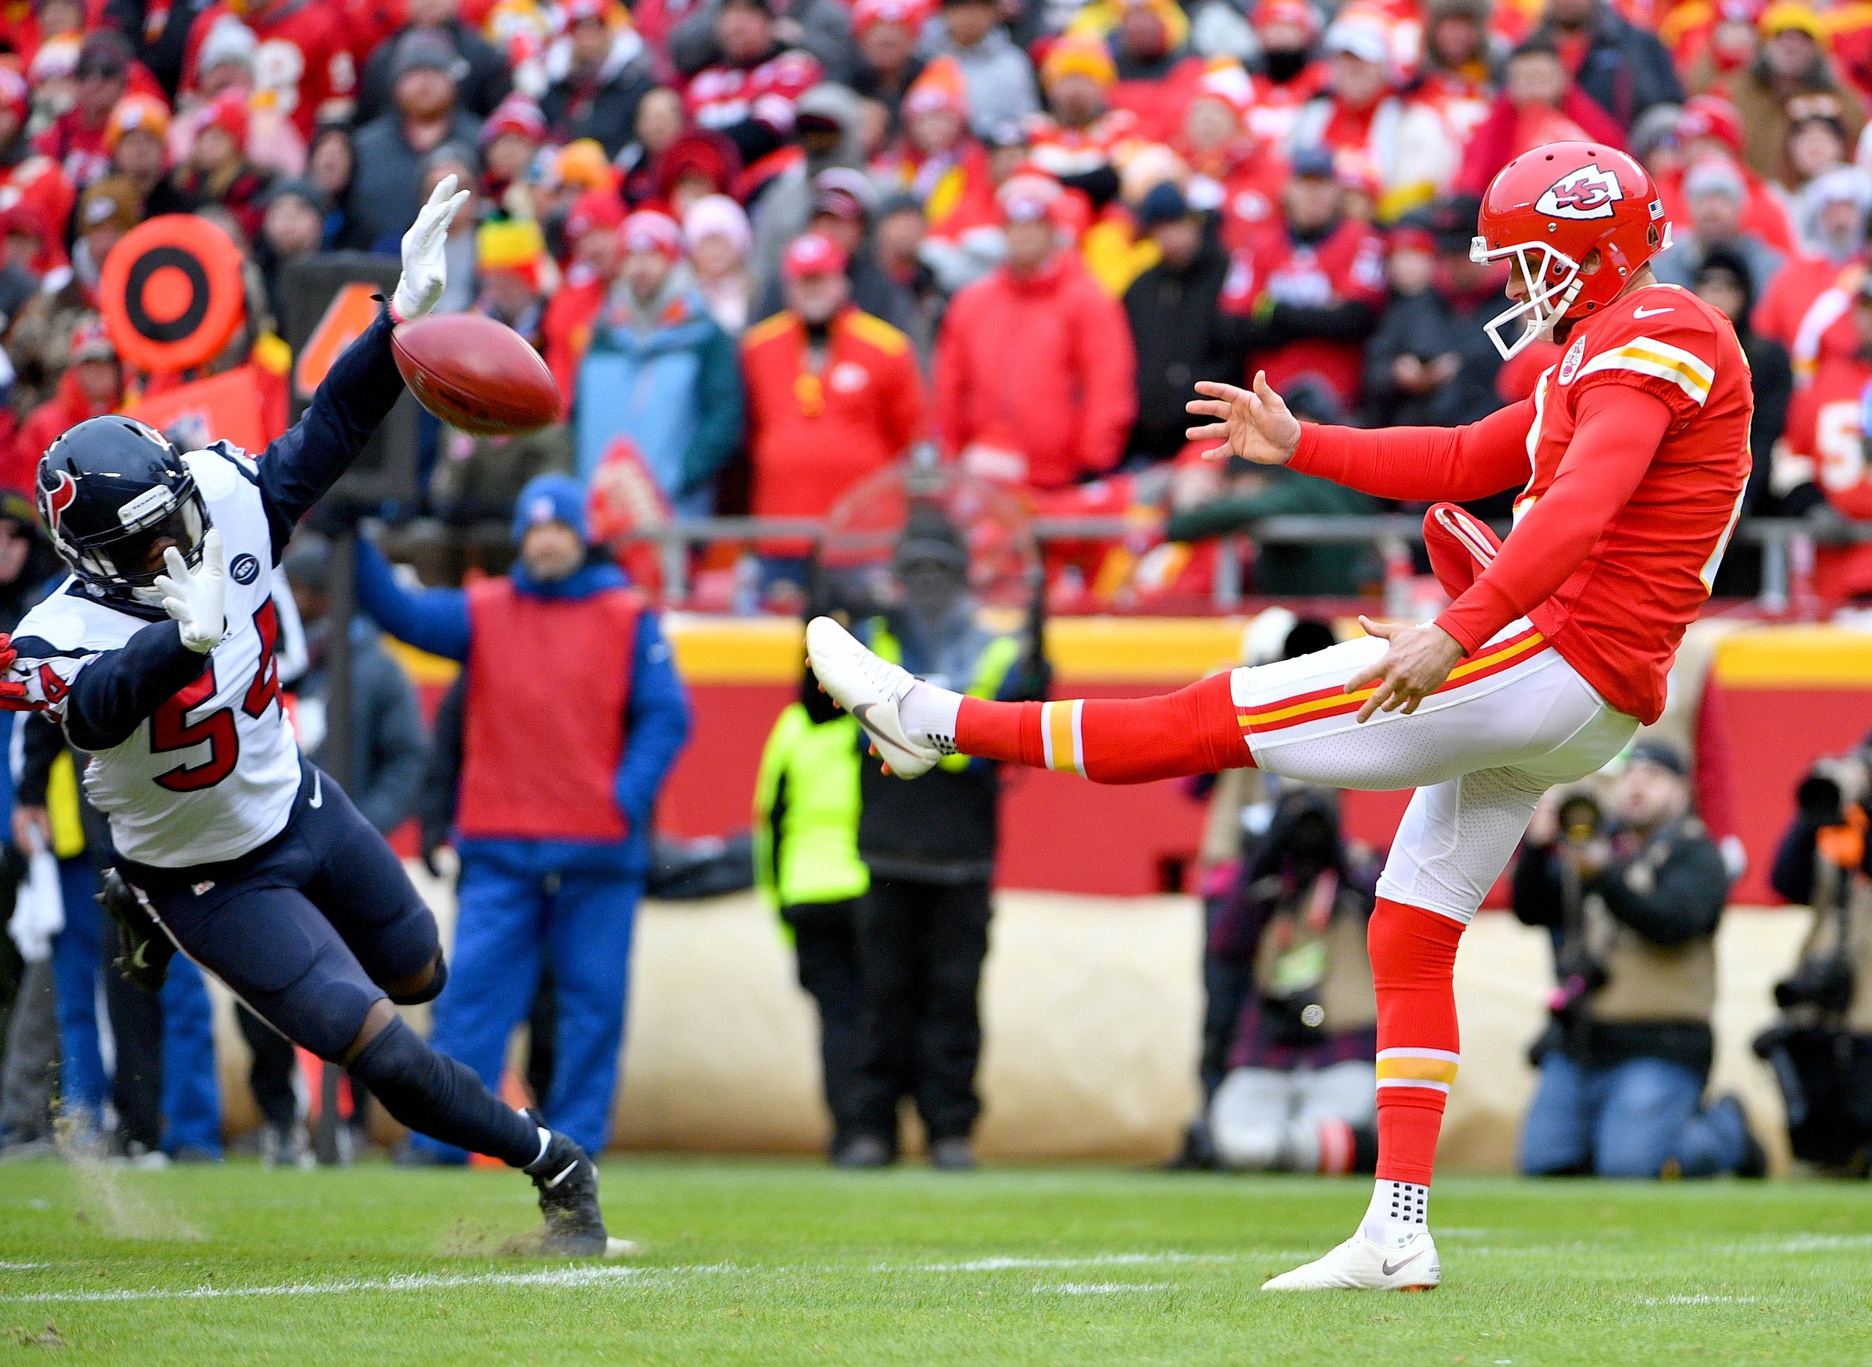 Kansas City Chiefs punter Dustin Colquitt and team appear to part ways